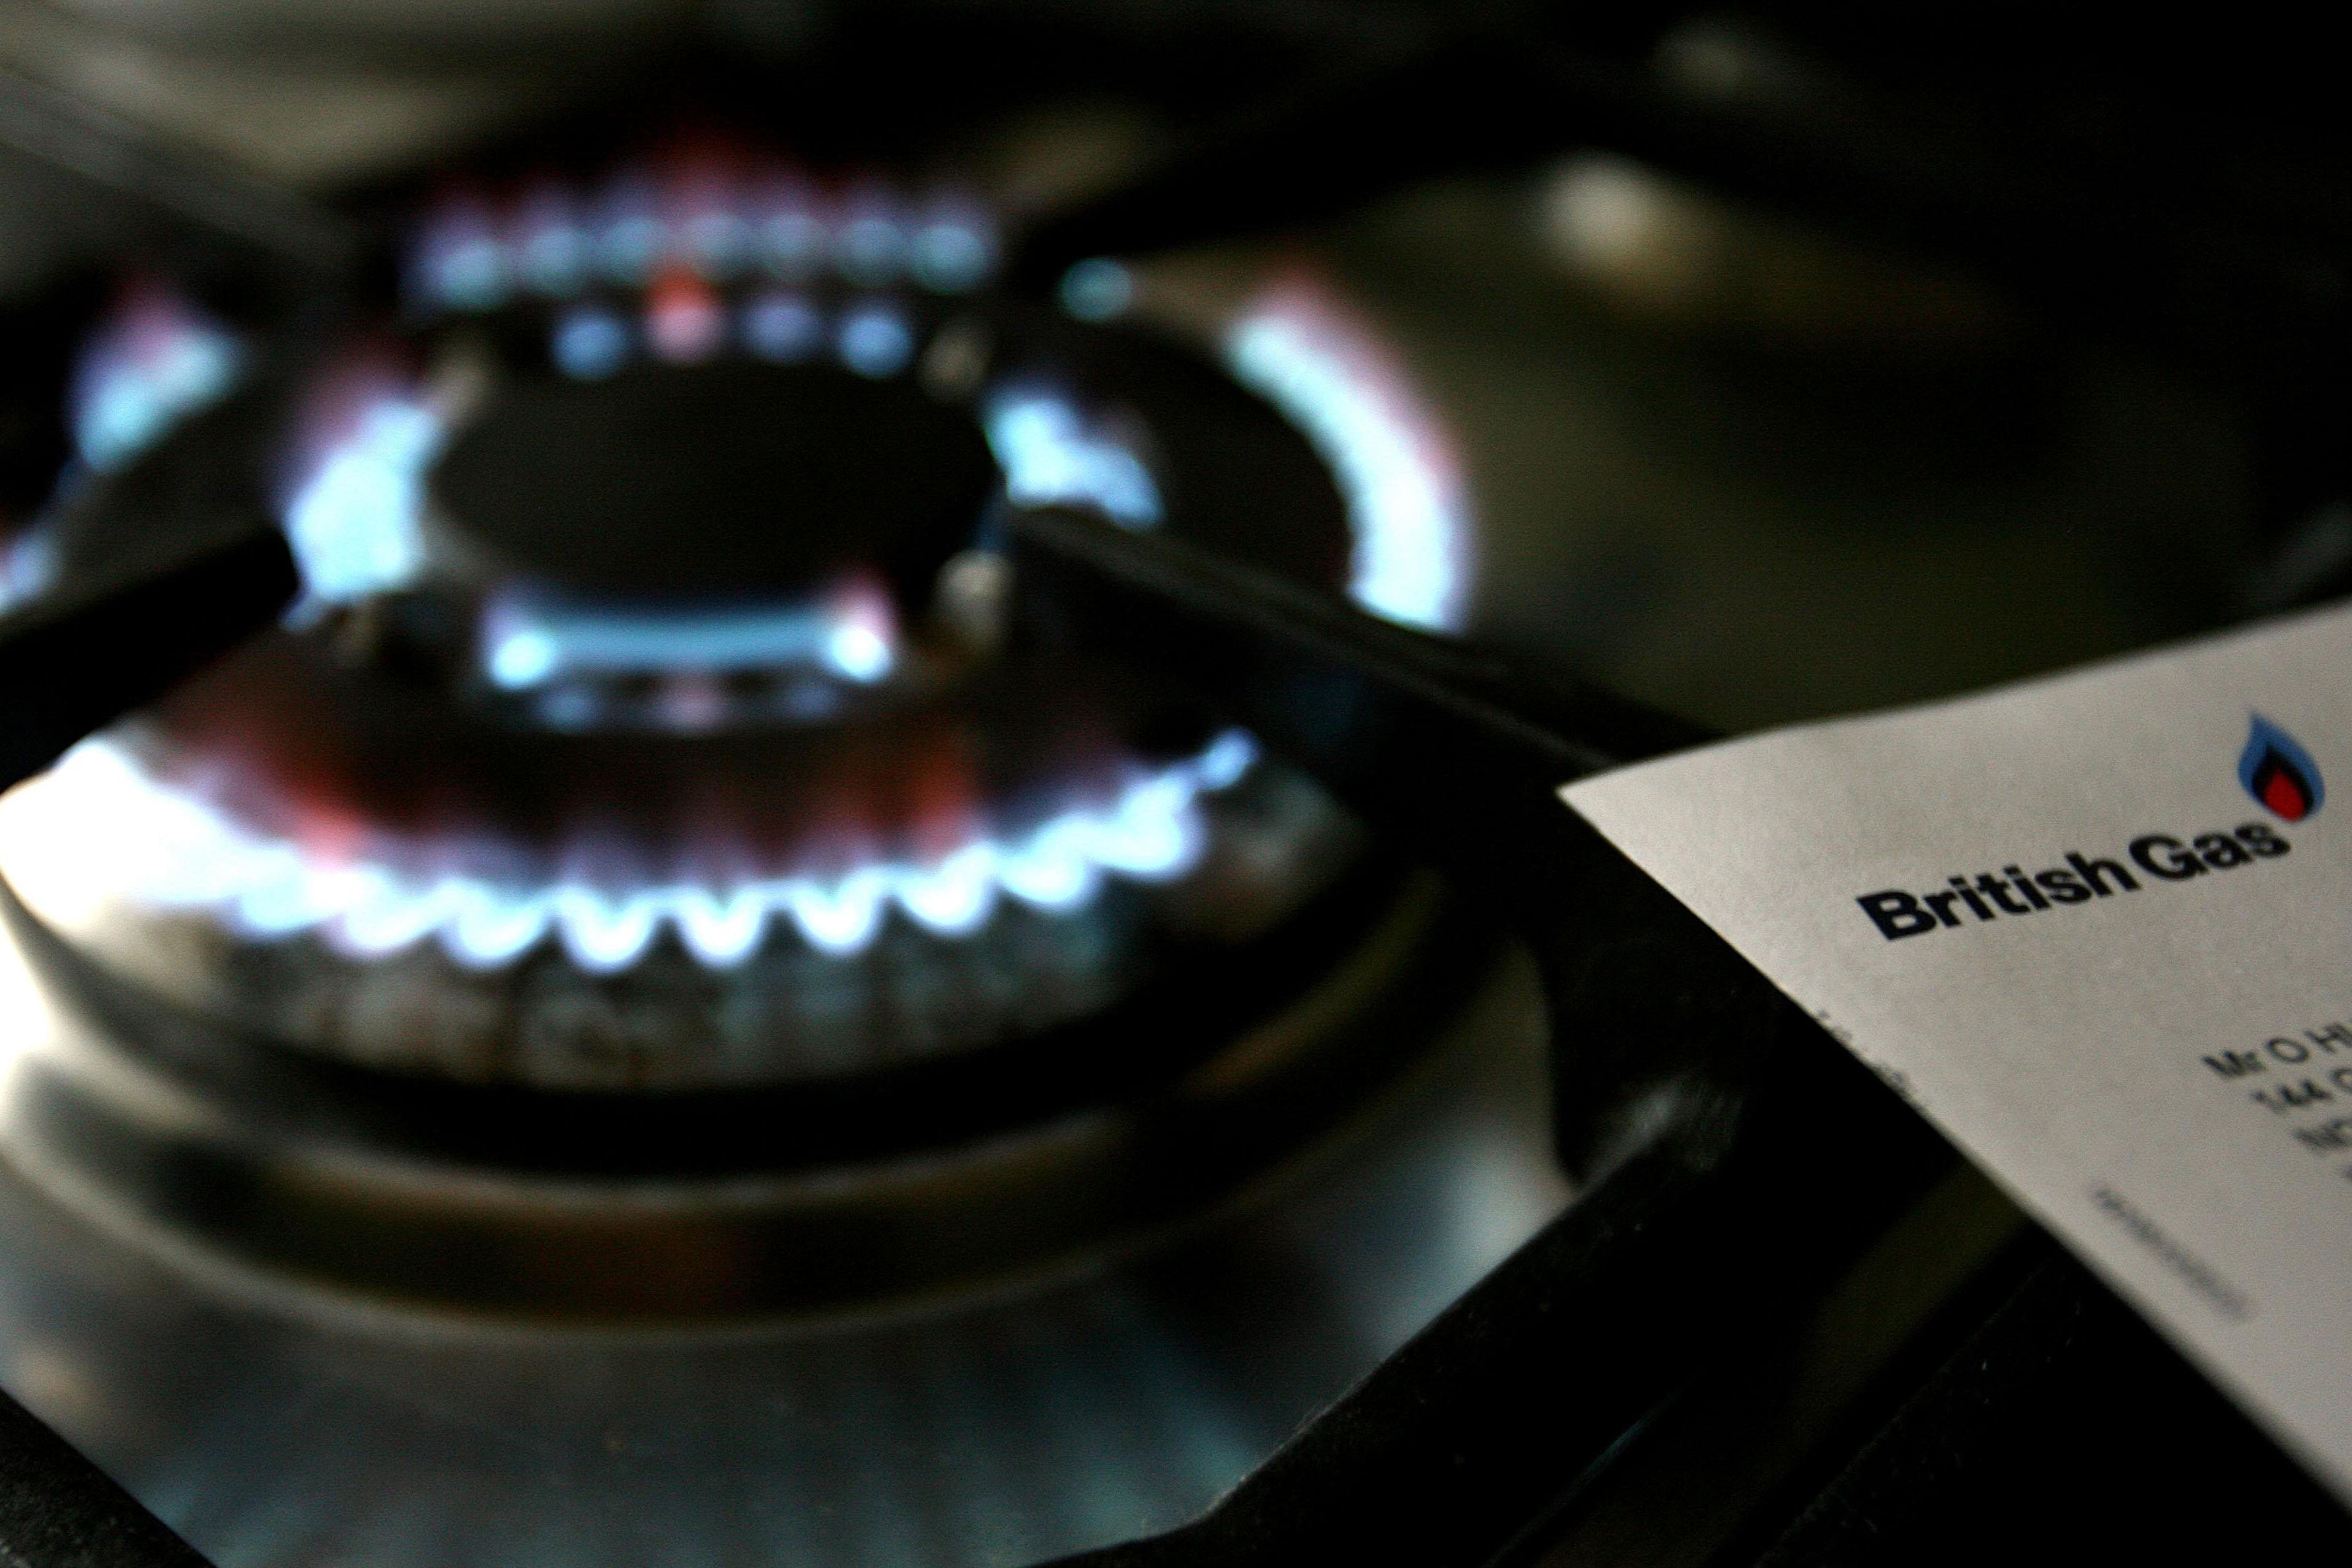 The best and worst energy suppliers for customer service have been revealed